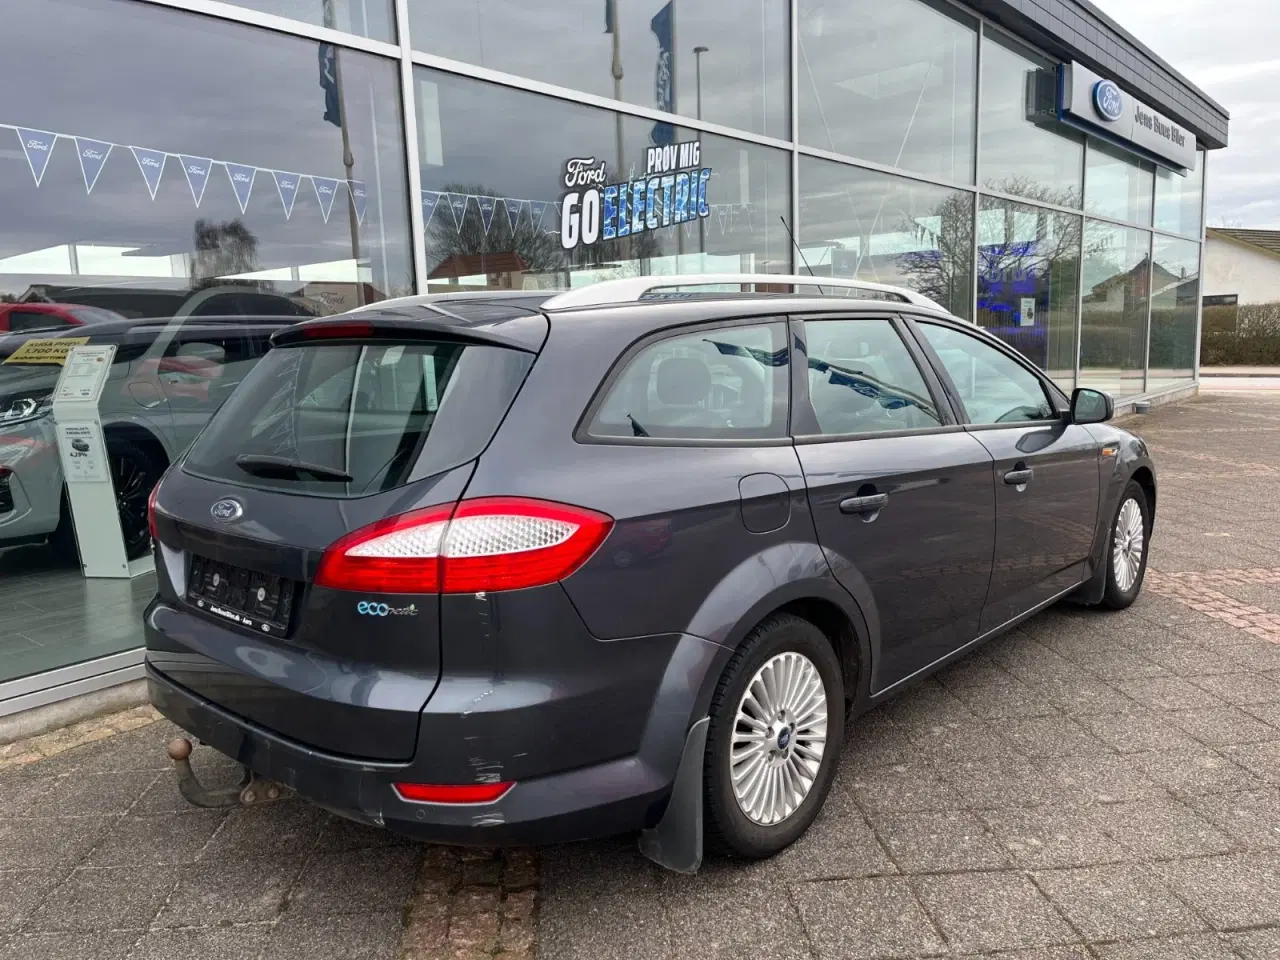 Billede 2 - Ford Mondeo 2,0 TDCi 115 ECOnetic stc.